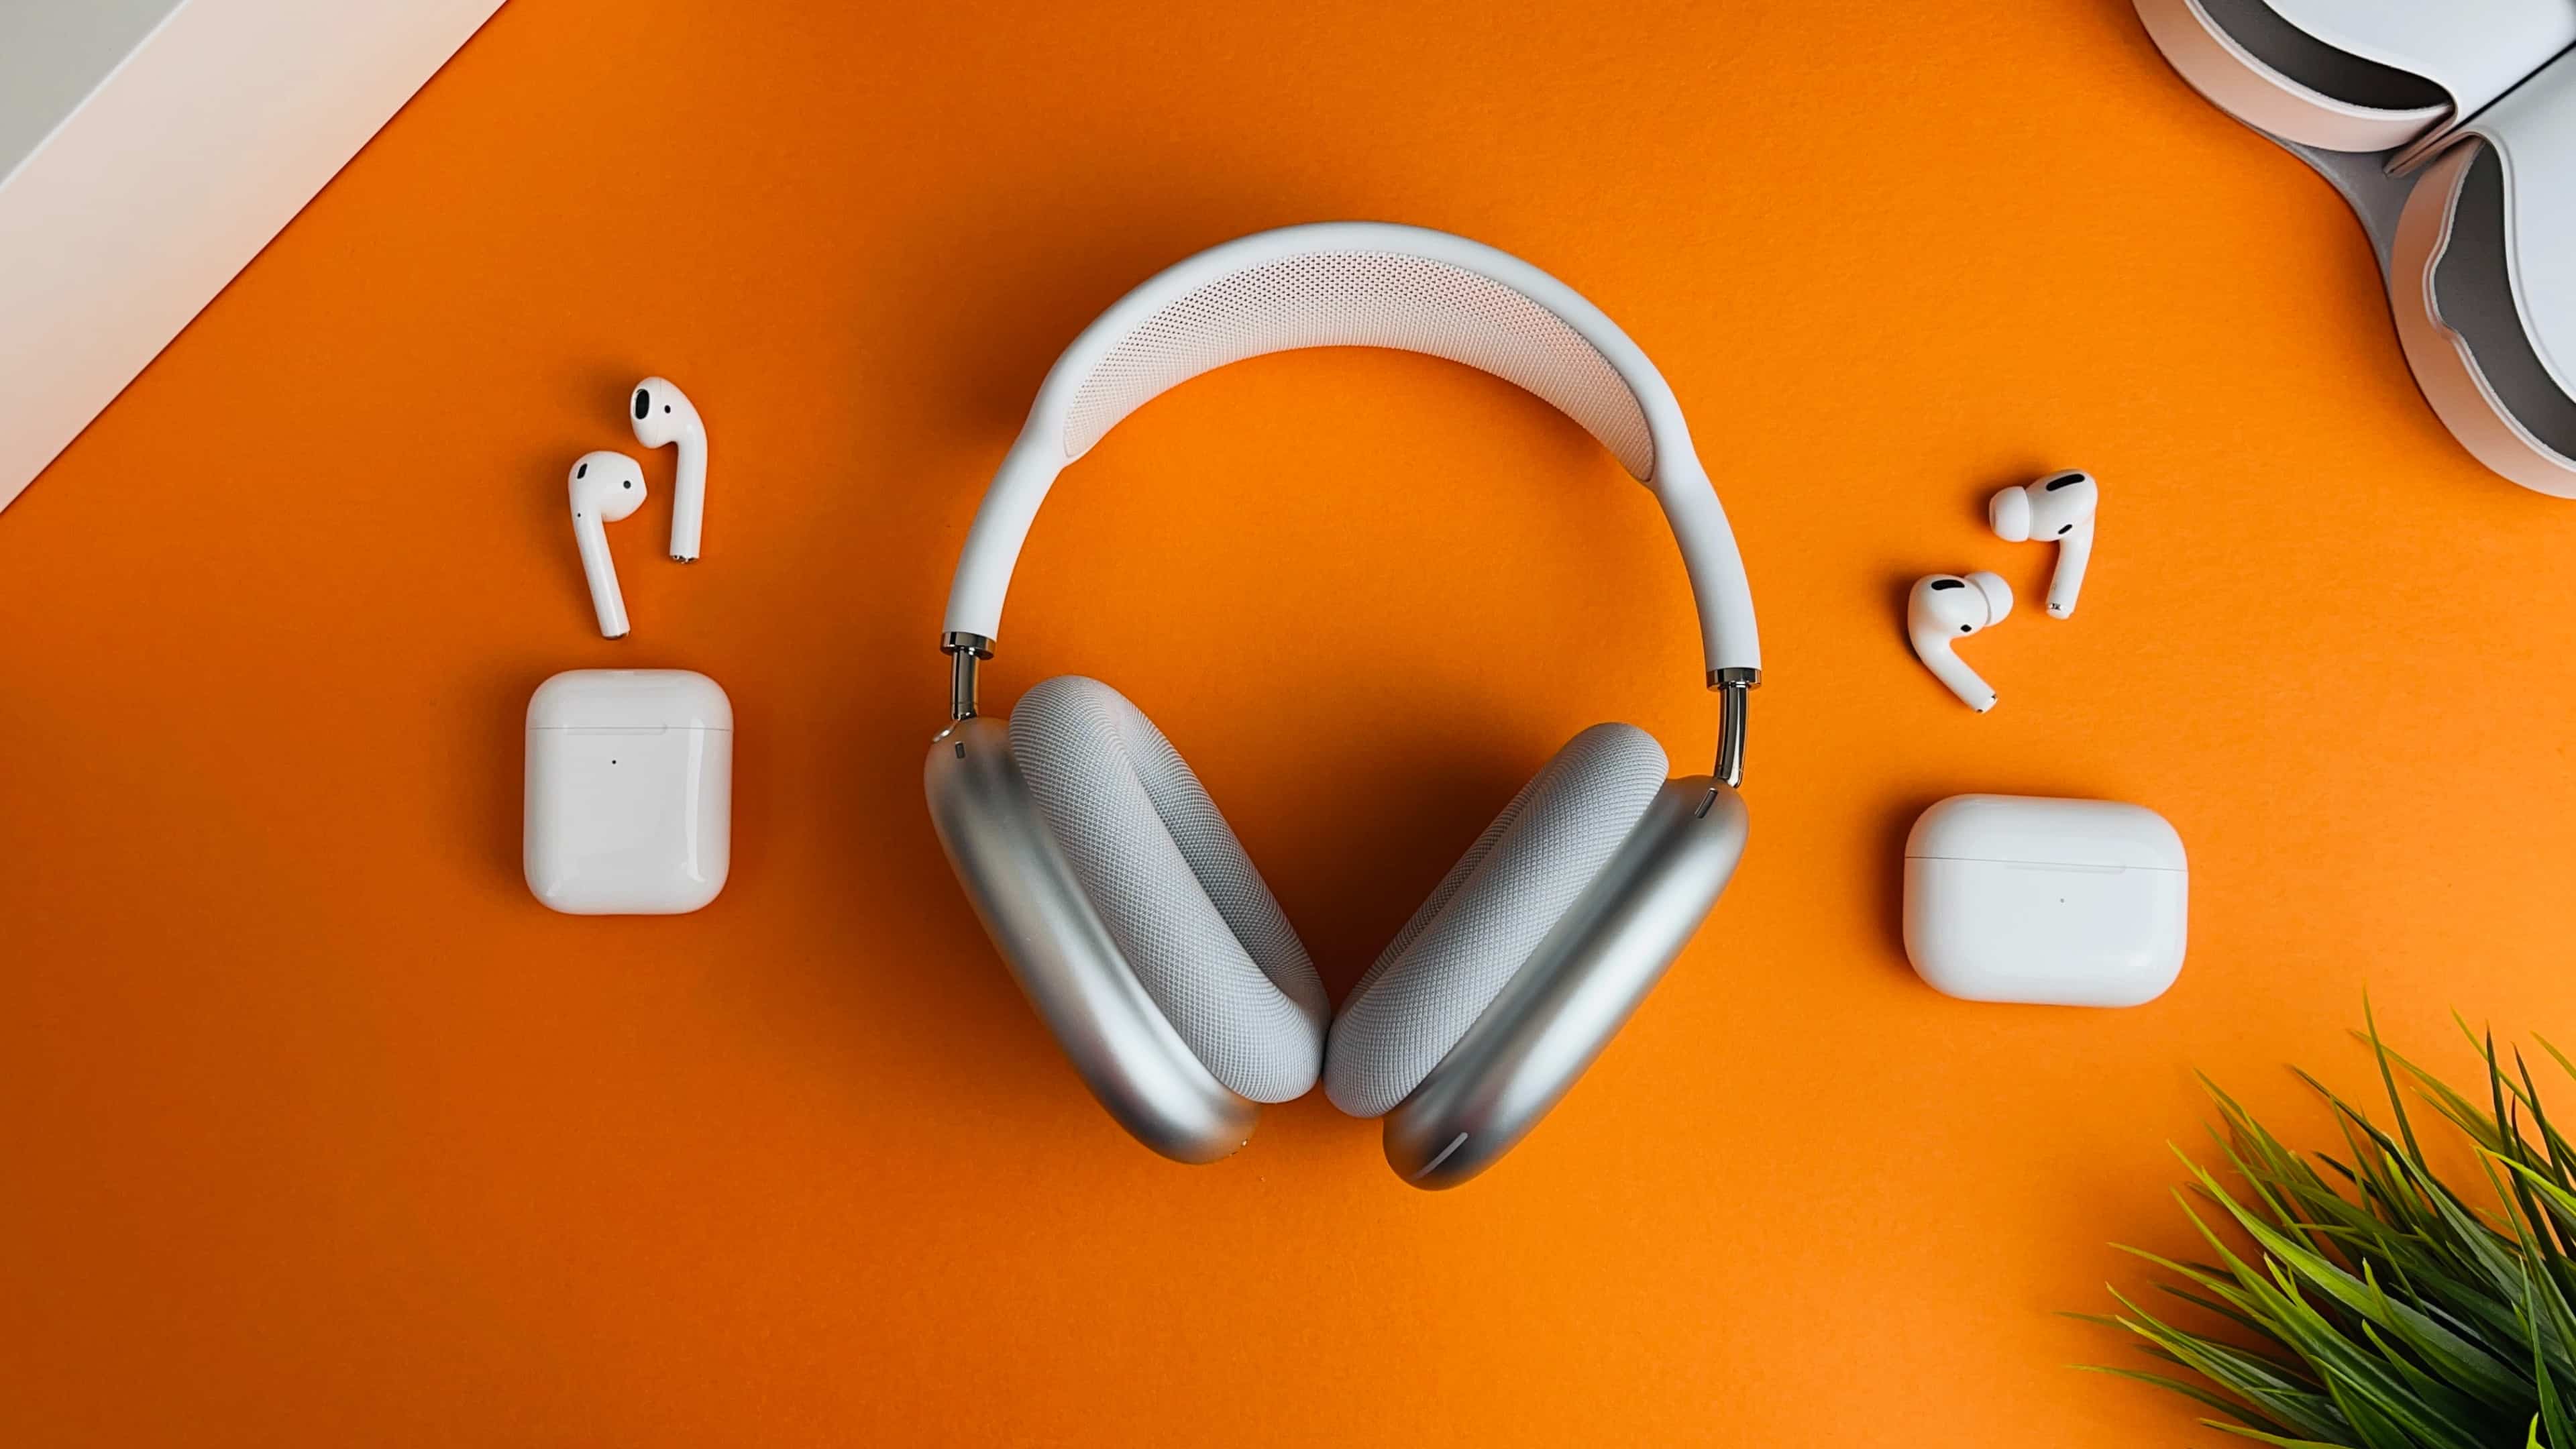 AirPods Max, the original AirPods and the first AirPods Pro laid flat on an orange table